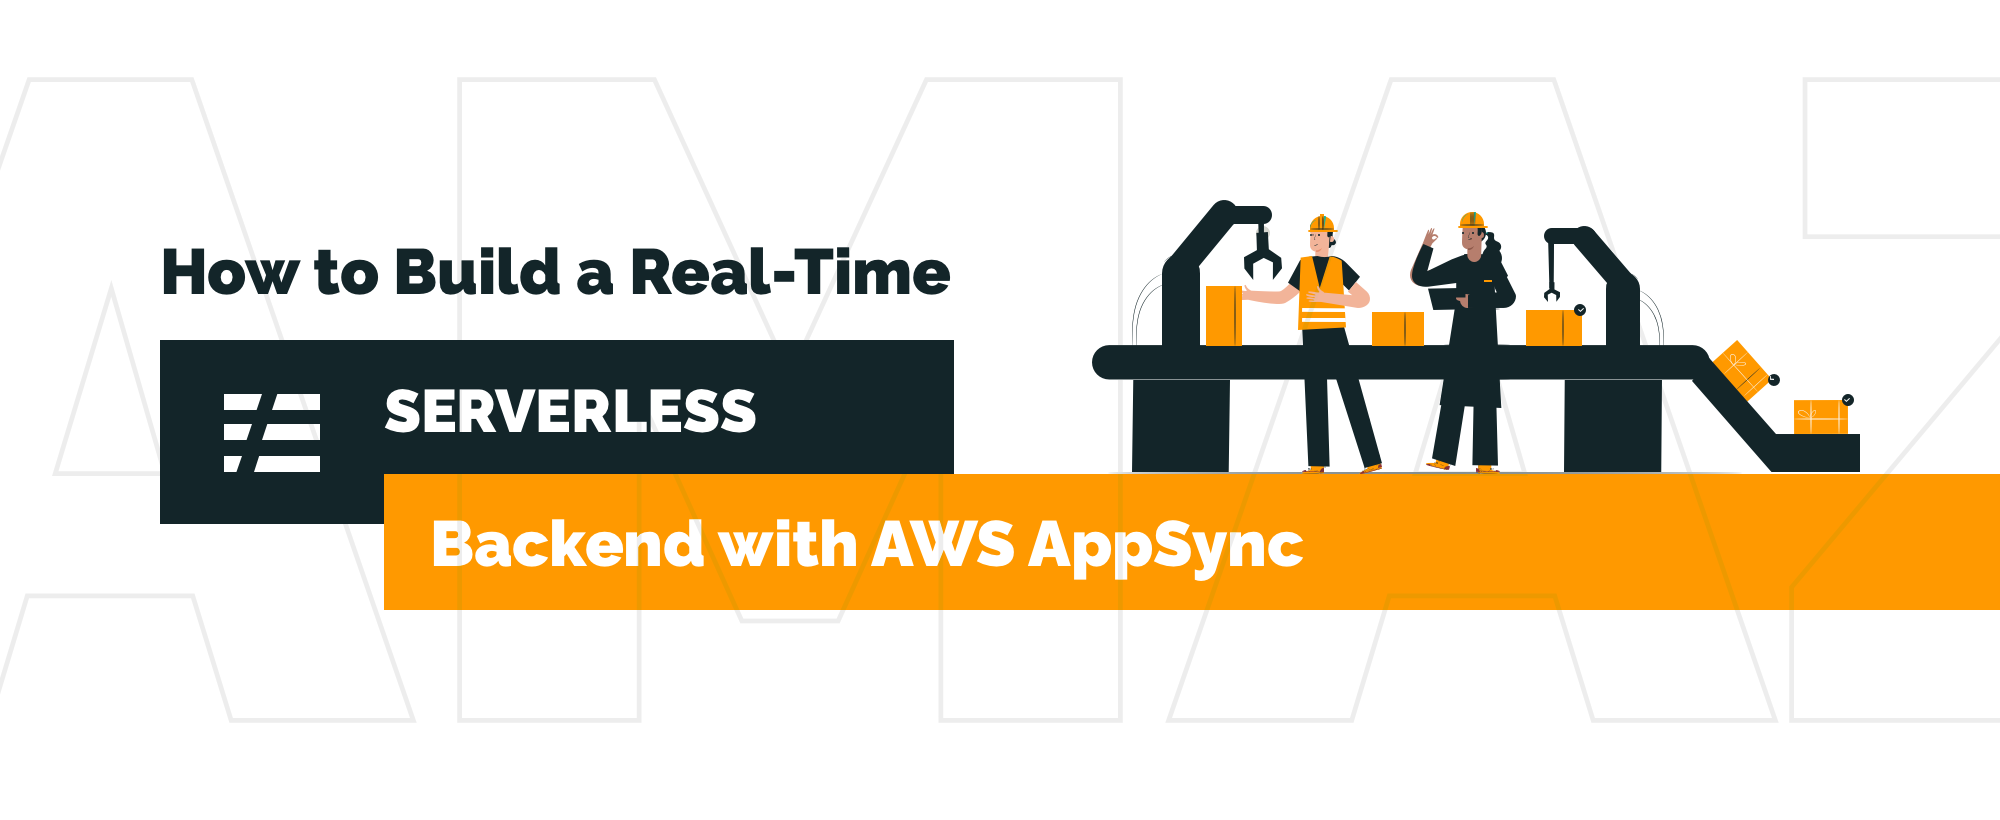 How to Build a Real-Time Serverless Backend with AWS AppSync